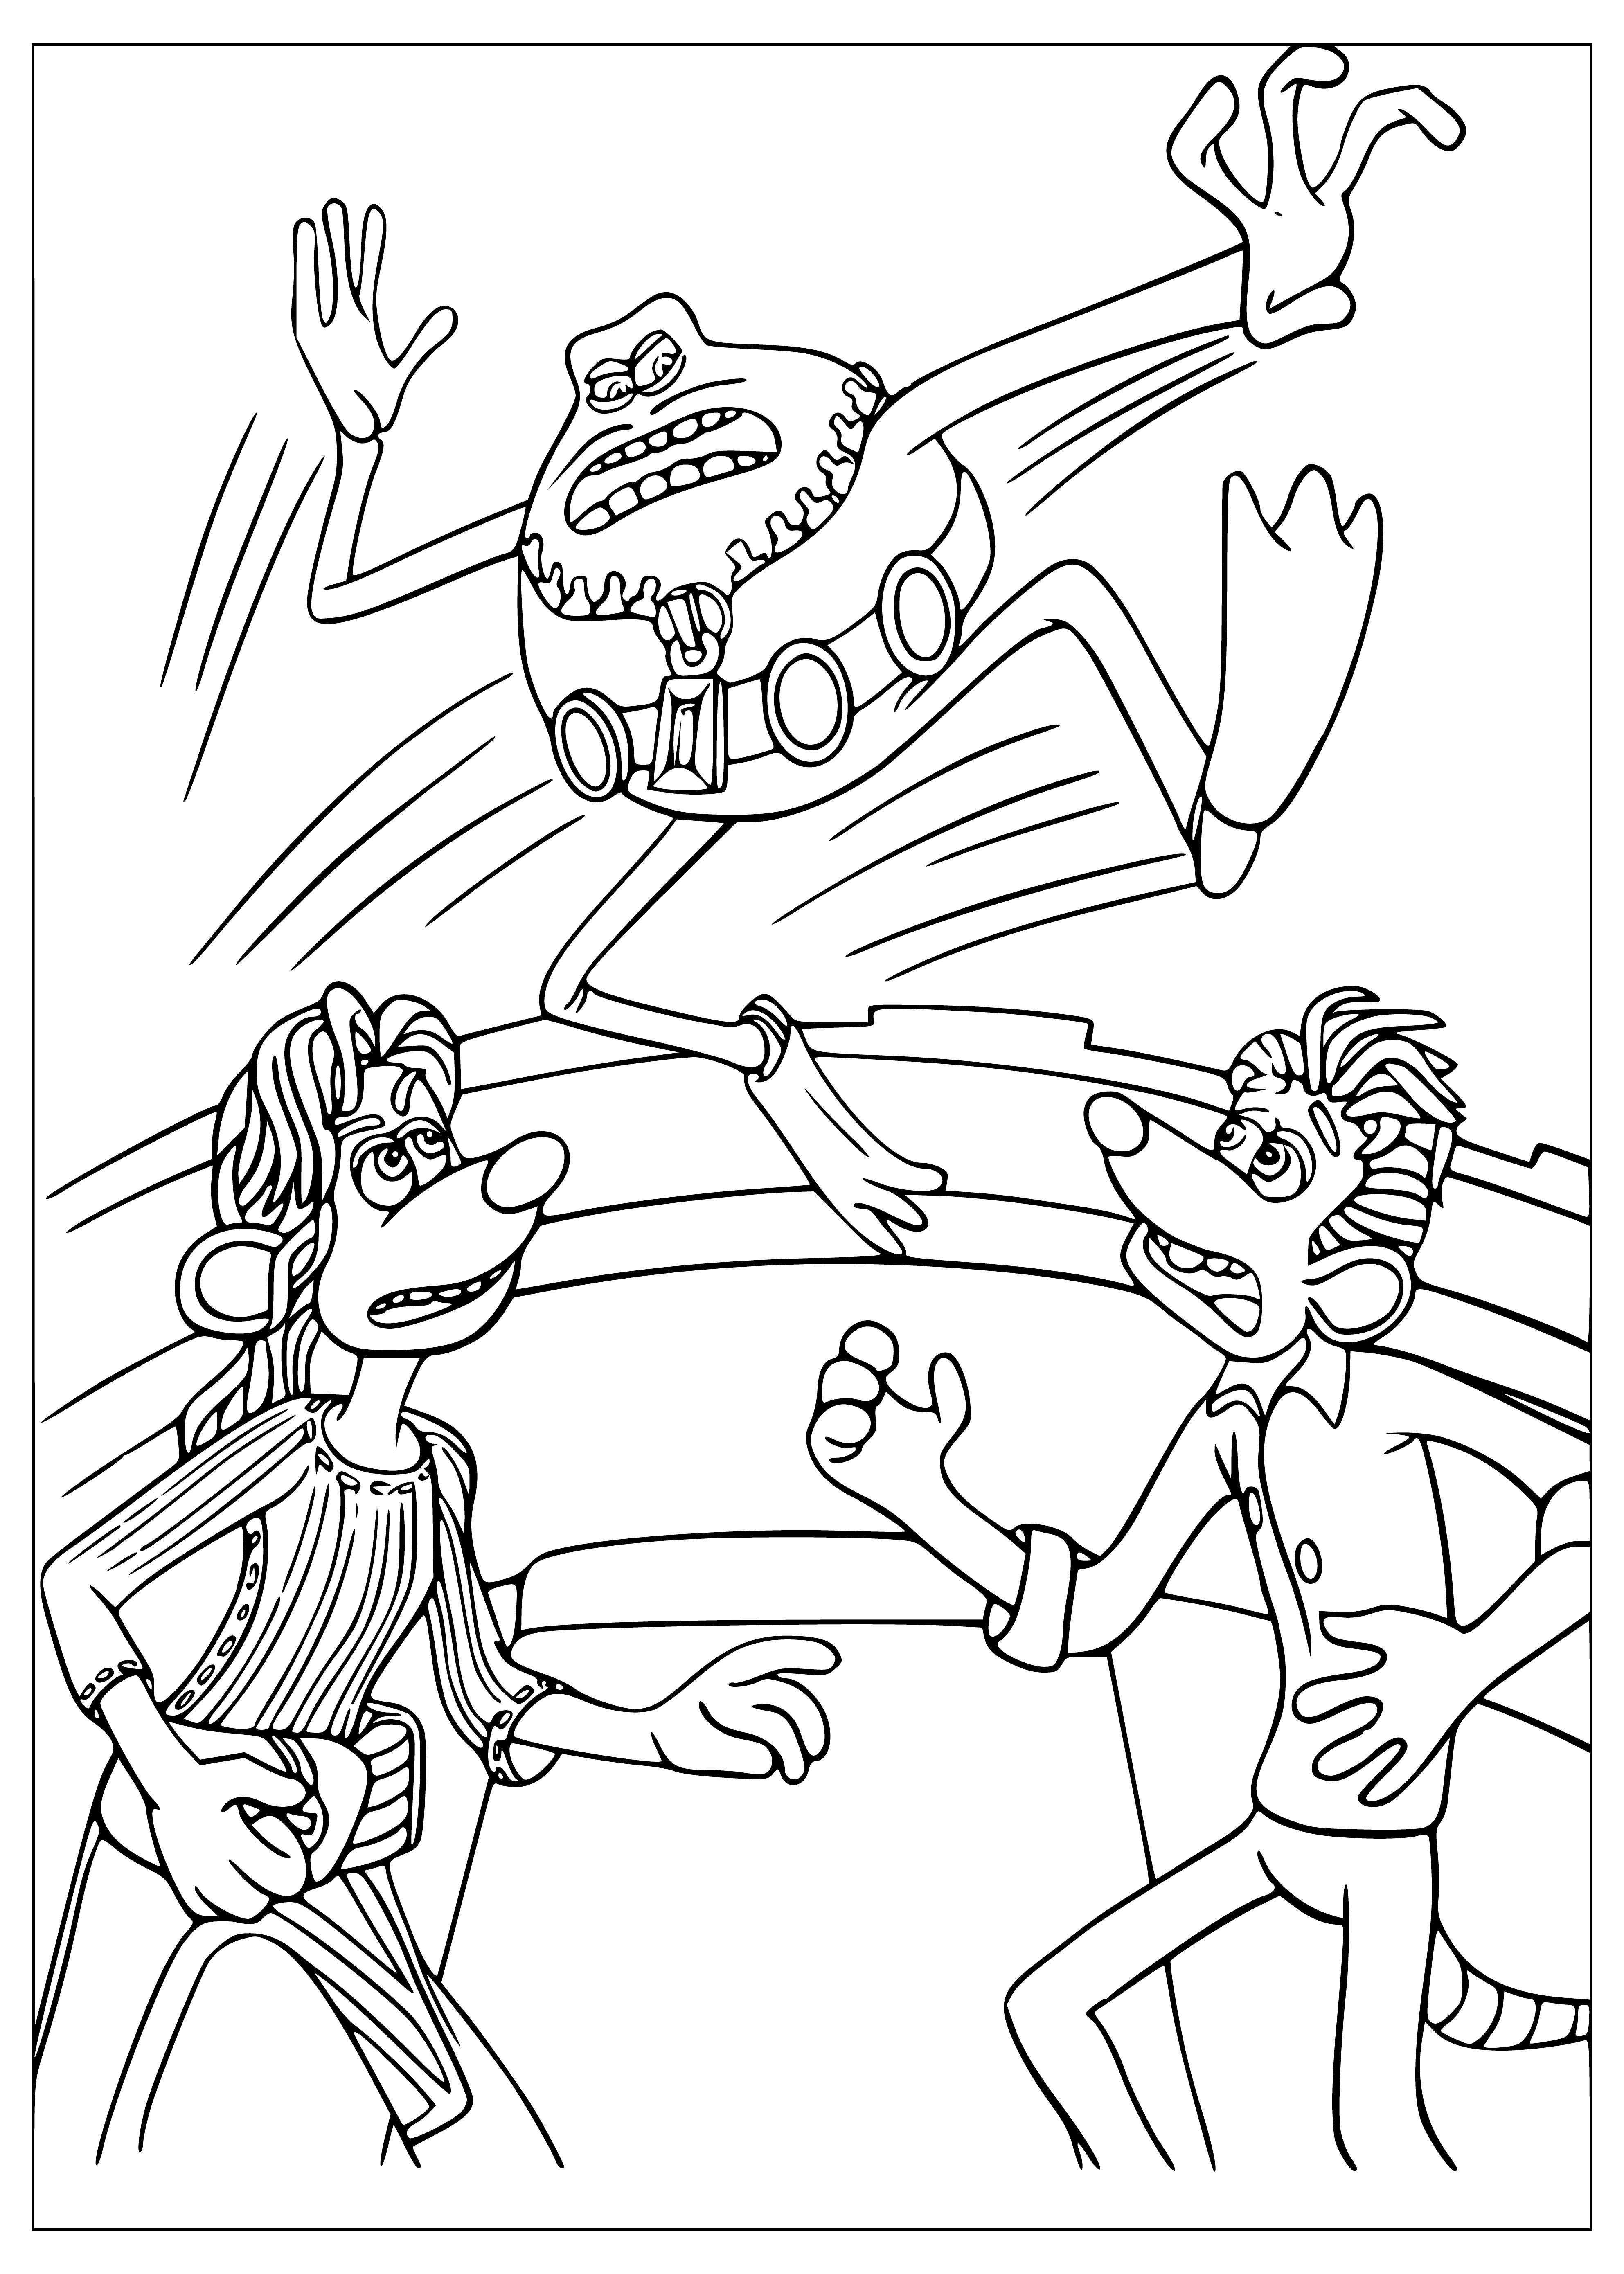 Toad, Rita and Roddy coloring page